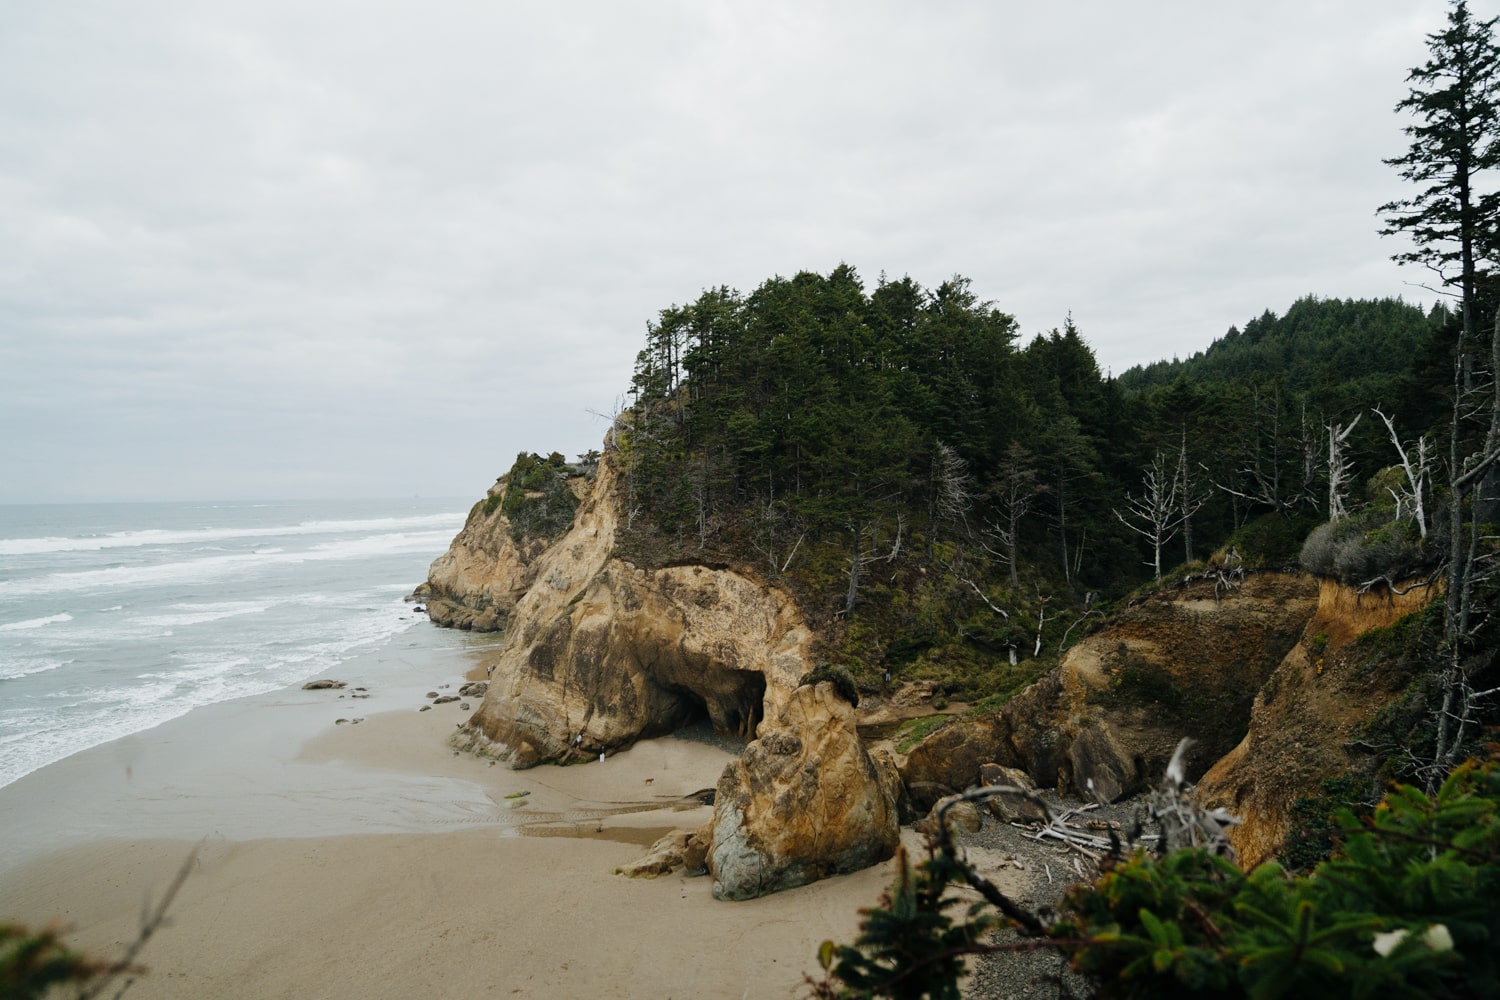 Guide to Hug Point – Waterfall, Beach, Caves, & More on the Oregon Coast!